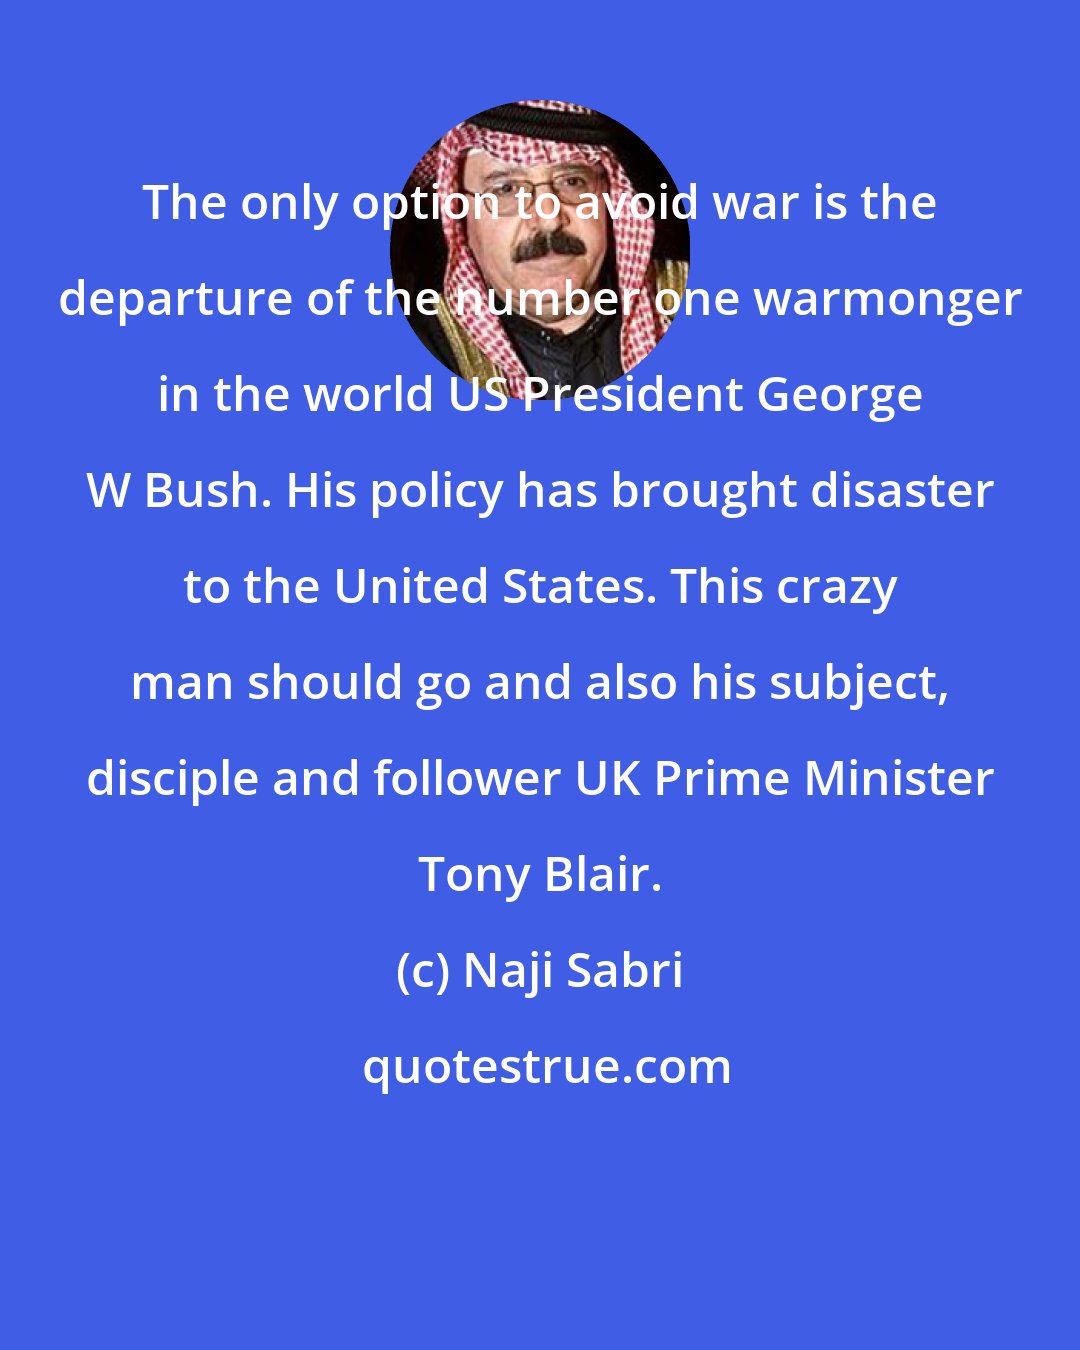 Naji Sabri: The only option to avoid war is the departure of the number one warmonger in the world US President George W Bush. His policy has brought disaster to the United States. This crazy man should go and also his subject, disciple and follower UK Prime Minister Tony Blair.